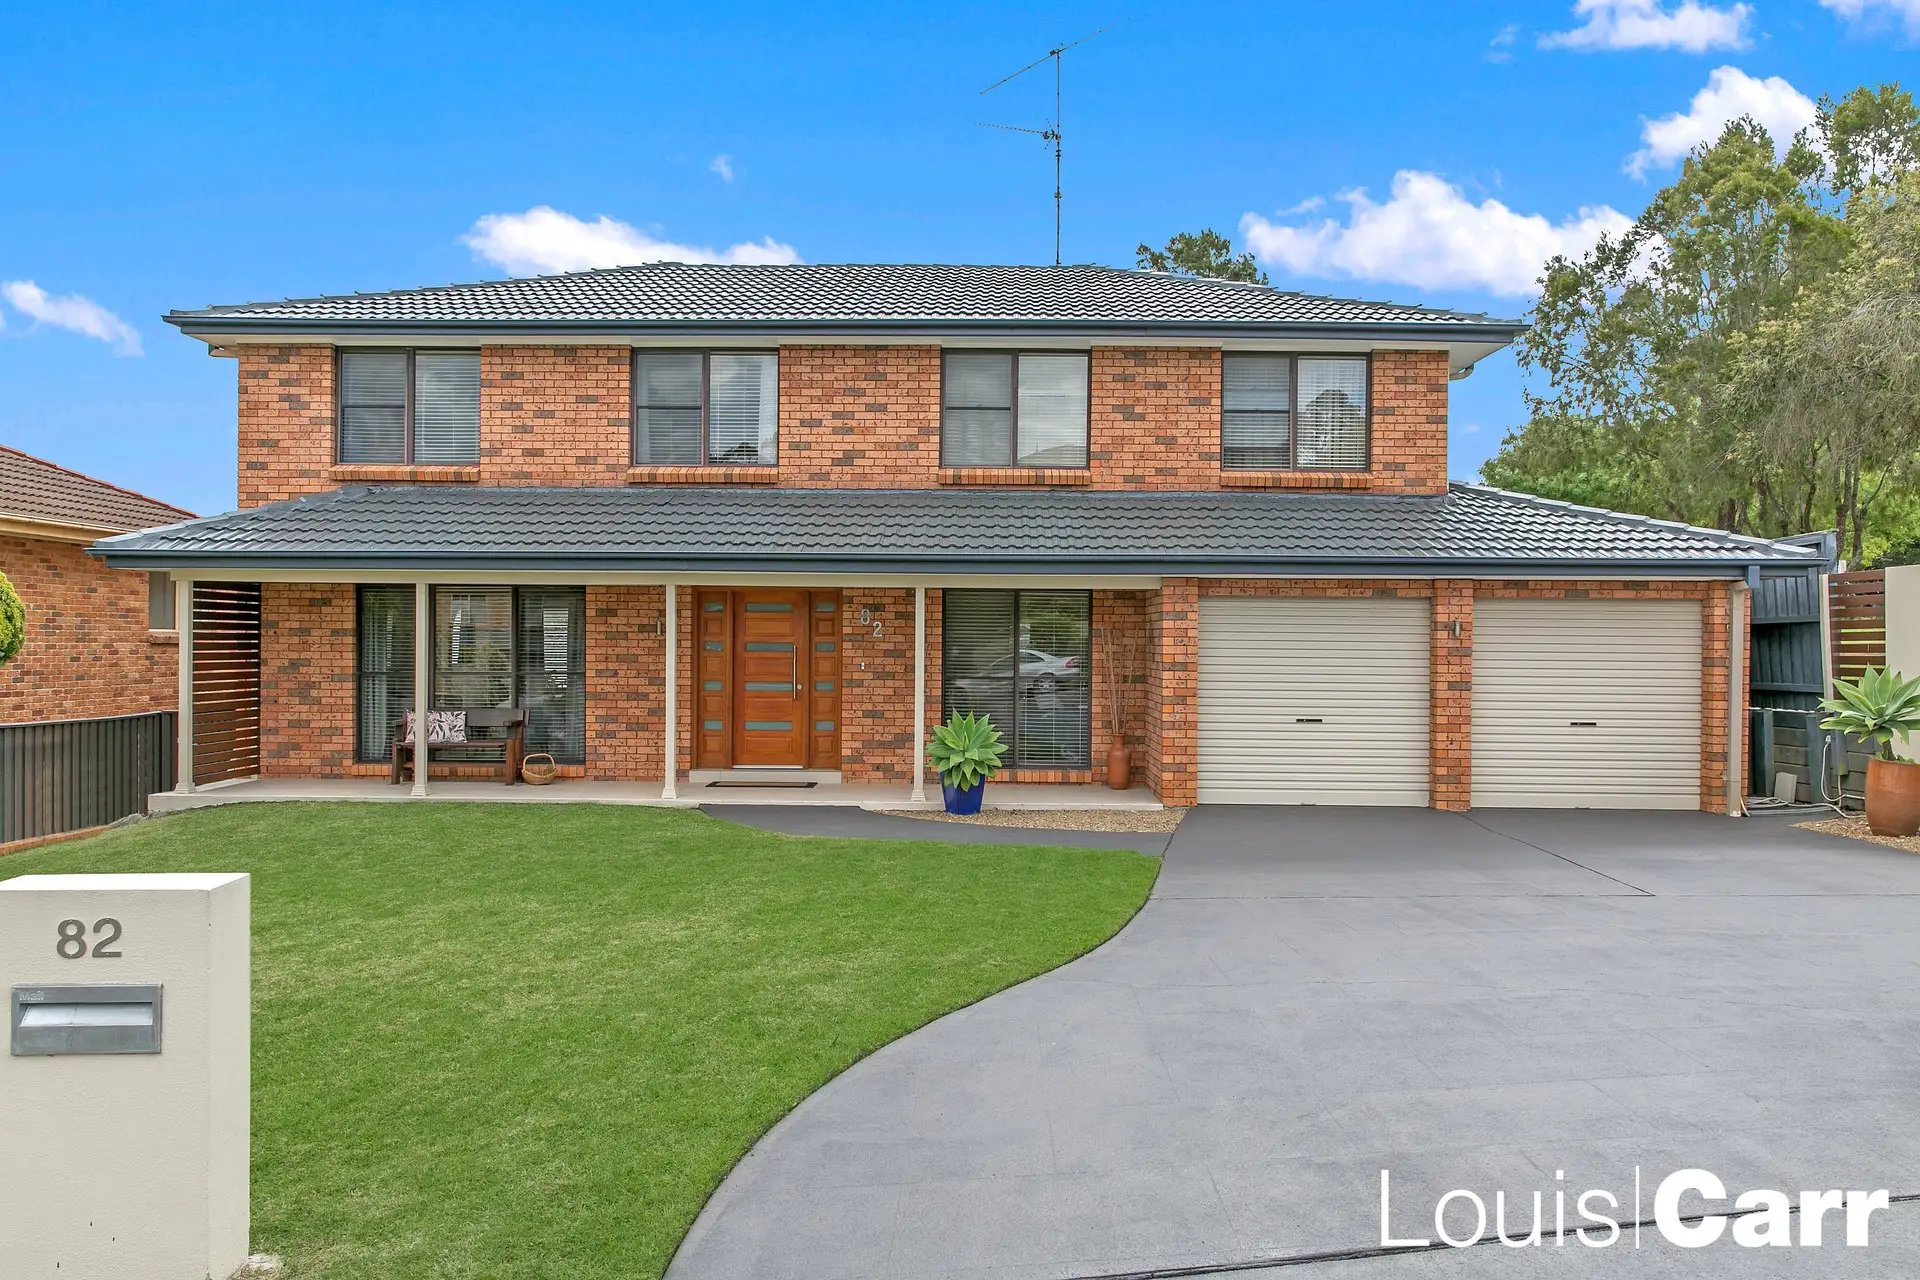 Photo #1: 82 Gooraway Drive, Castle Hill - Sold by Louis Carr Real Estate